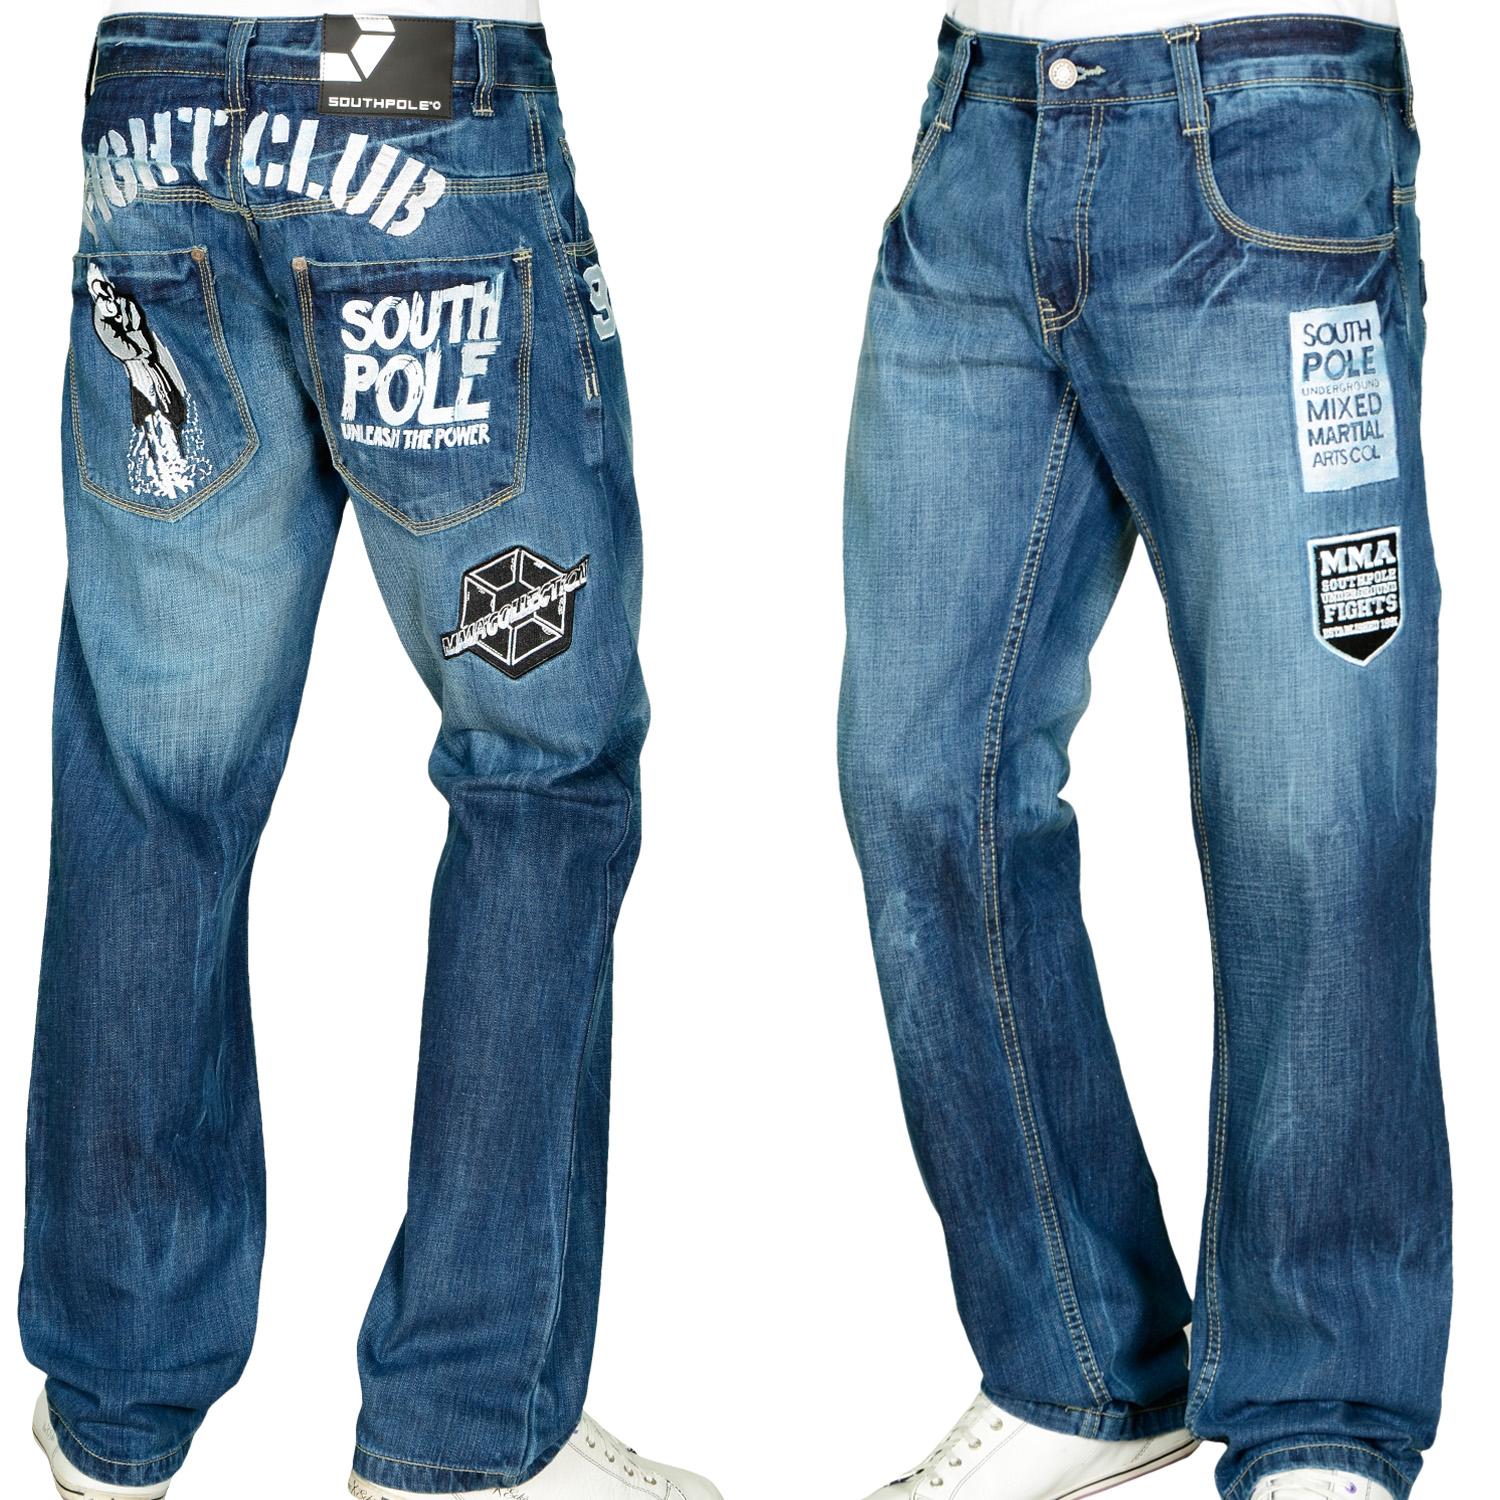 Foto Southpole Osaka Hombres Loose Fit Jeans Azul Real foto 453277